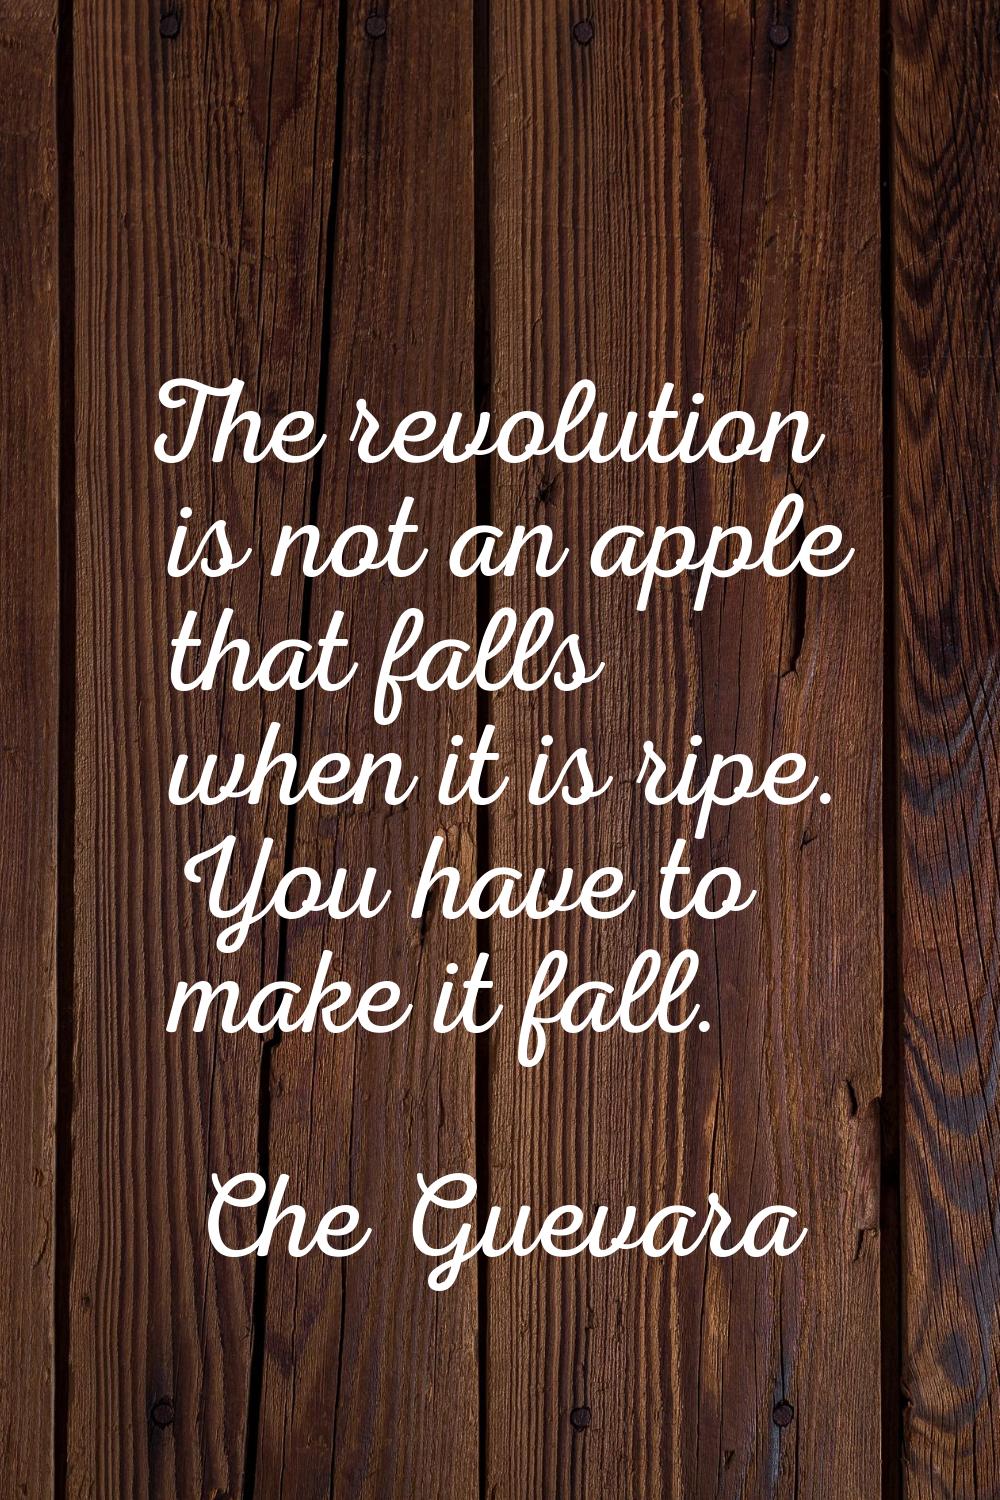 The revolution is not an apple that falls when it is ripe. You have to make it fall.